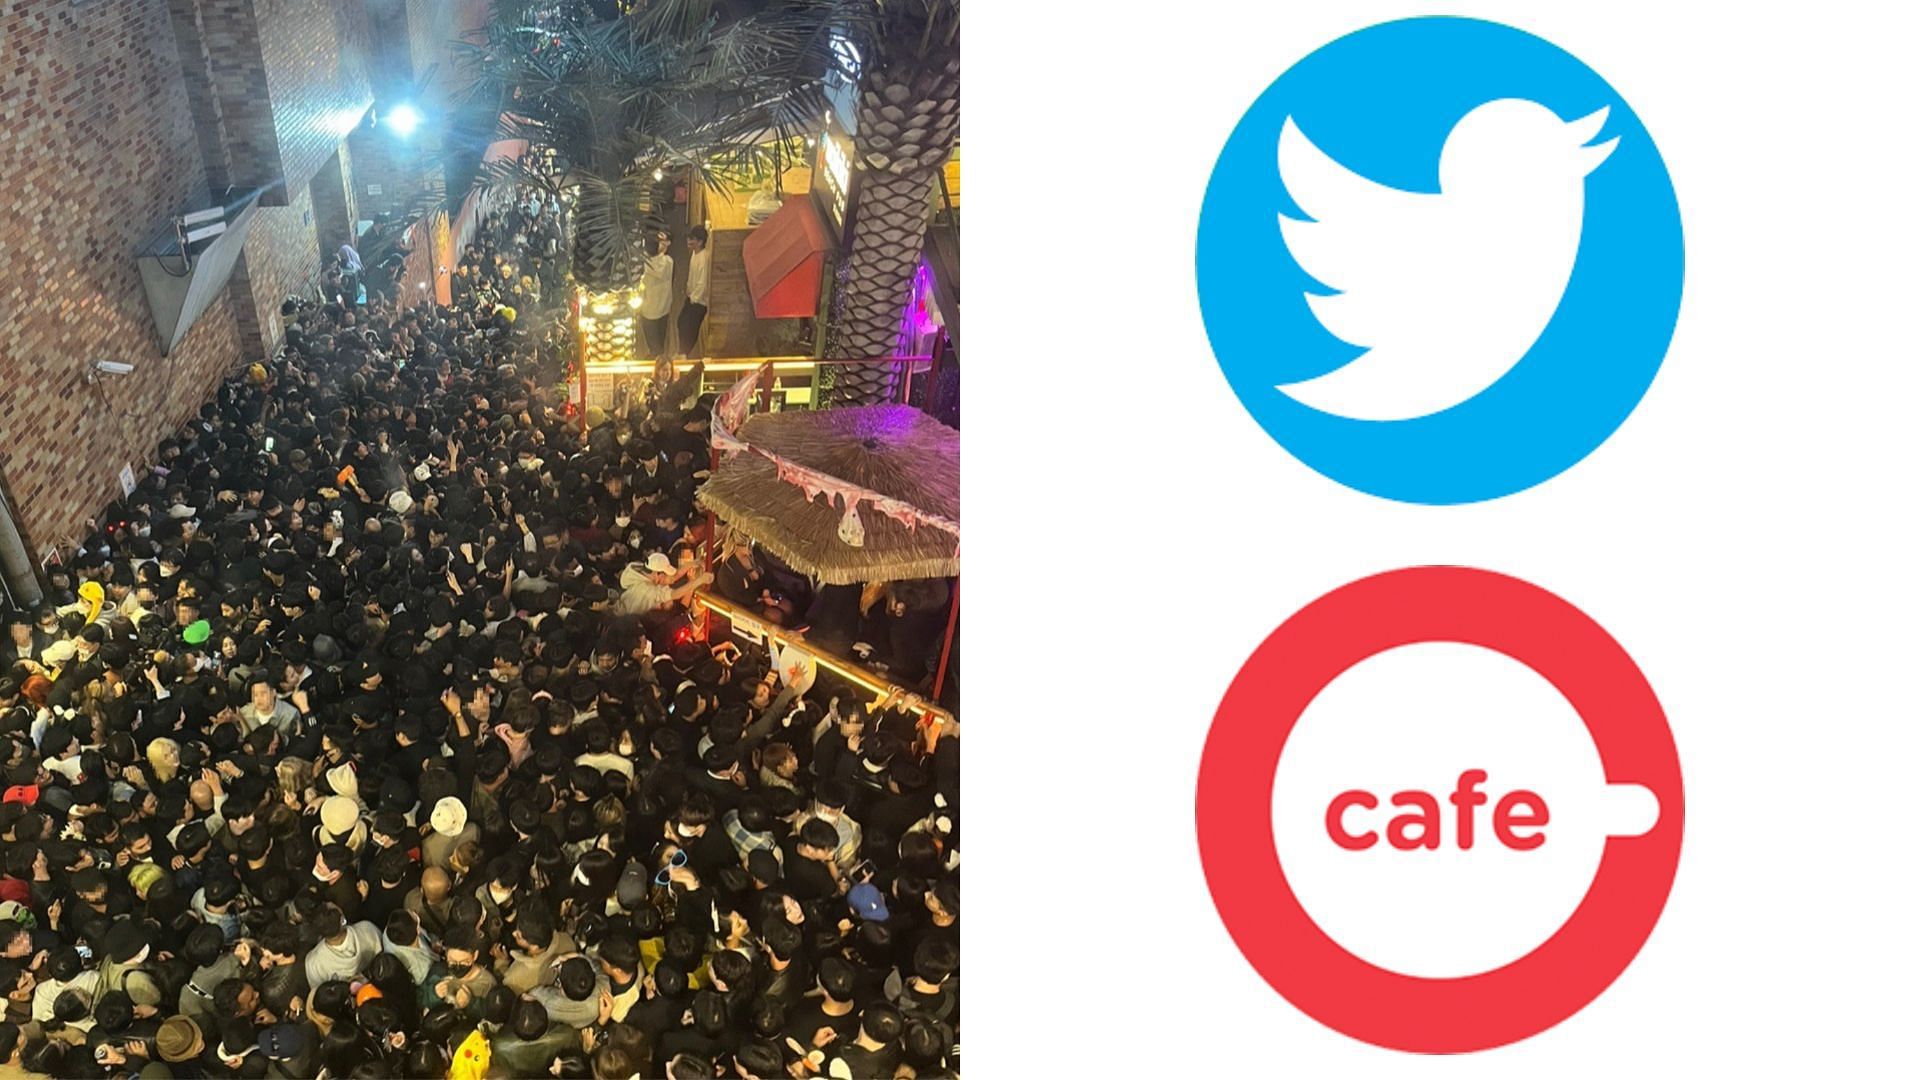 Twitter and Kakao Daum Cafe request users to refrain from sharing misinformation or sensitive content regarding Itaewon Halloween disaster (Image via Yonhap, PNGKey, Kakao Corp website)